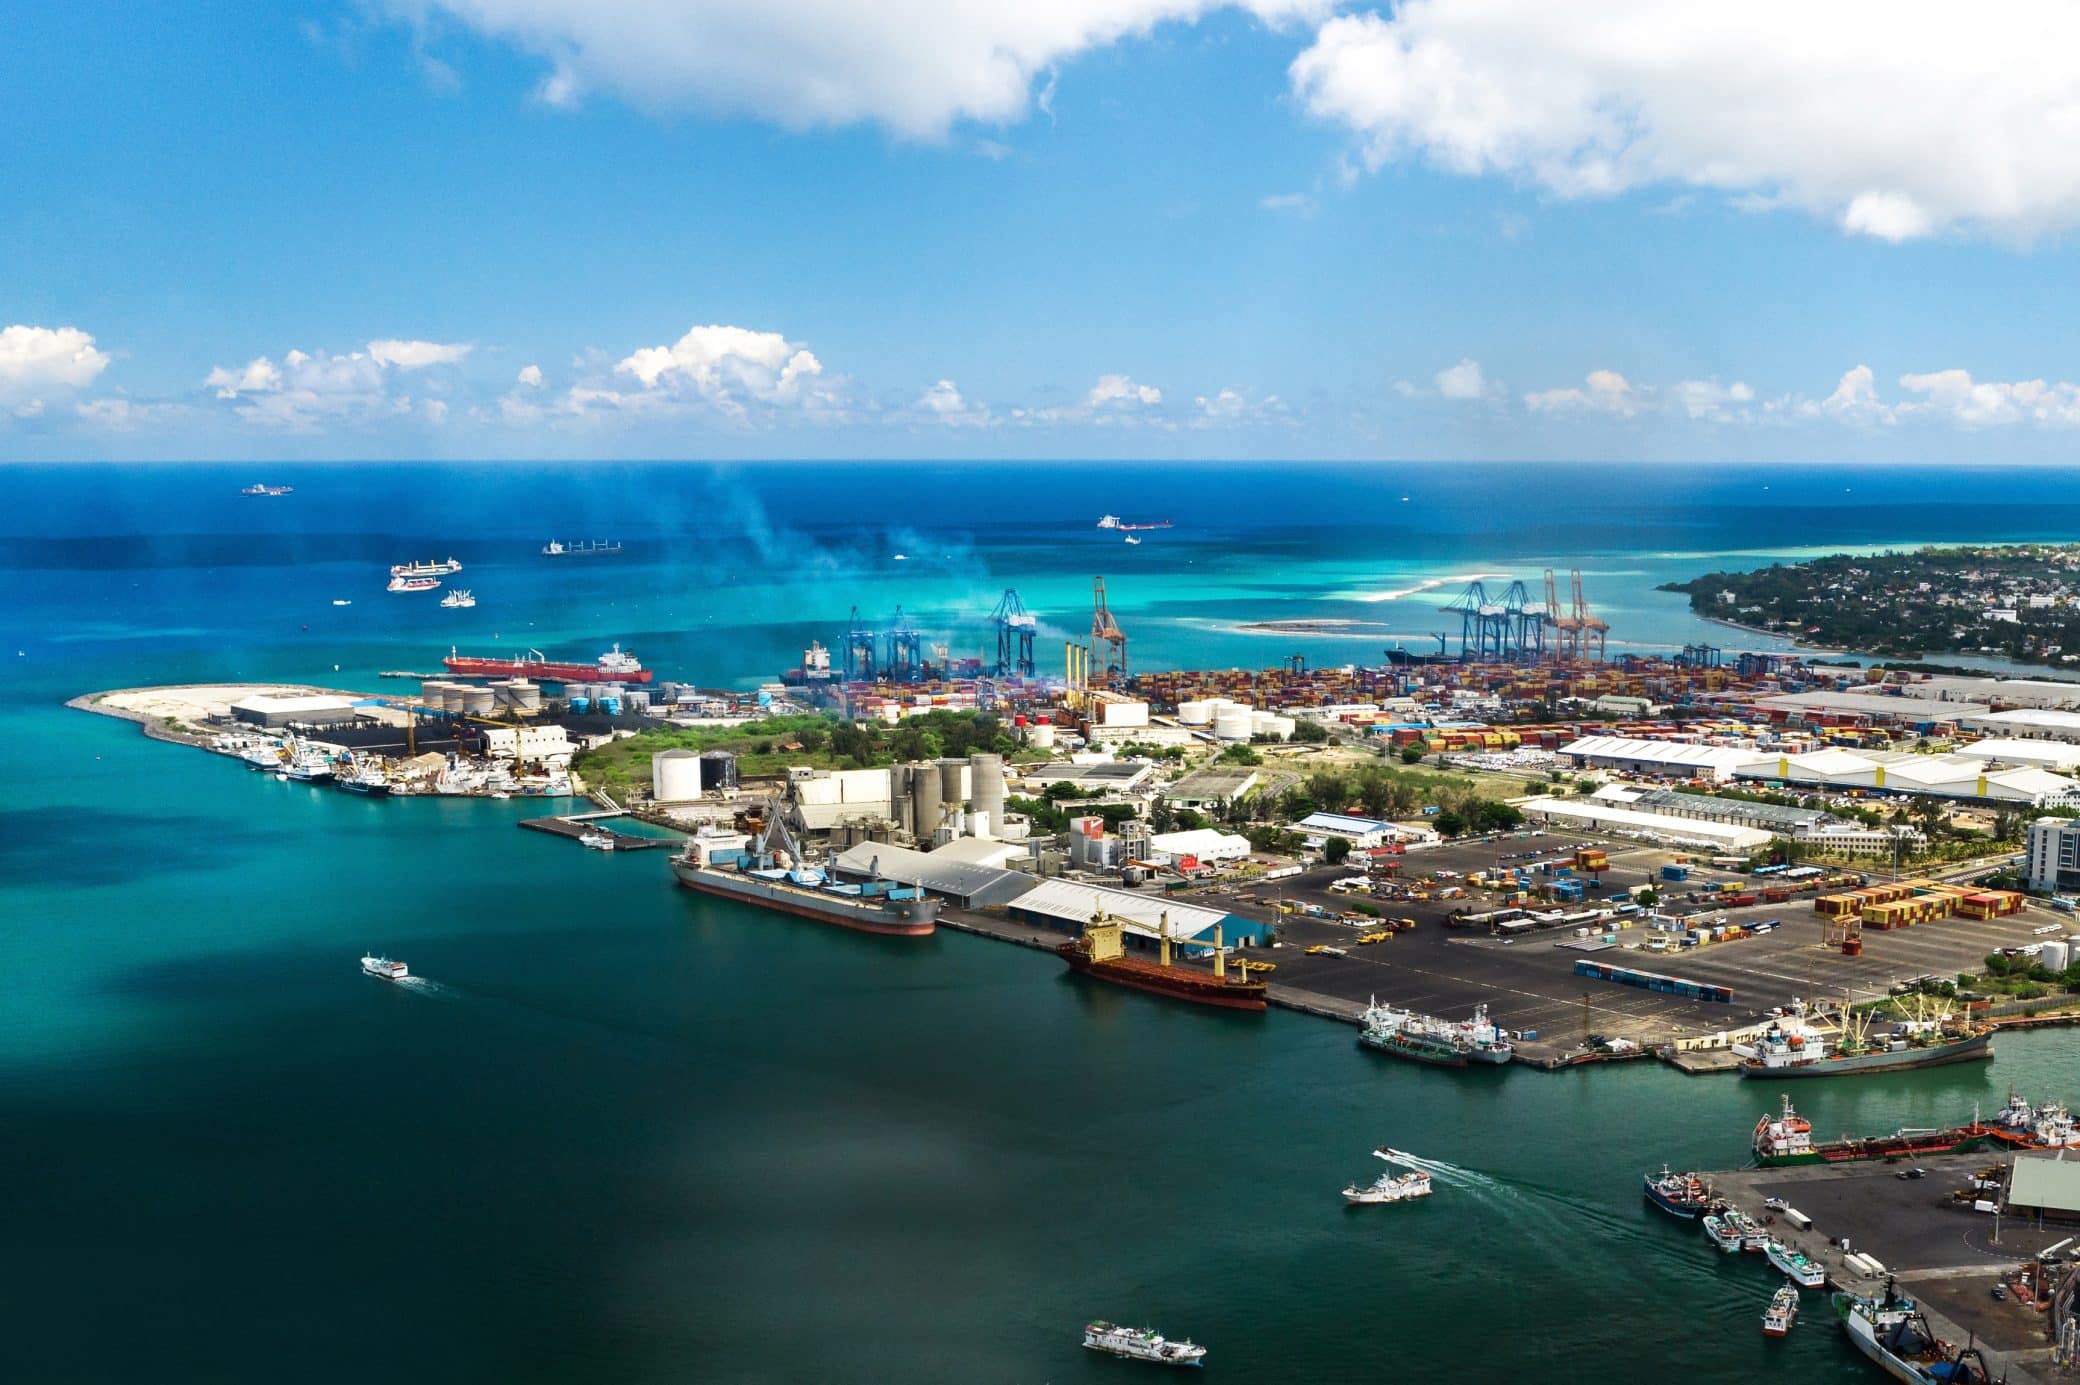 Aerial View Of The Port On The Waterfront Of Port Louis, Mauritius, Africa